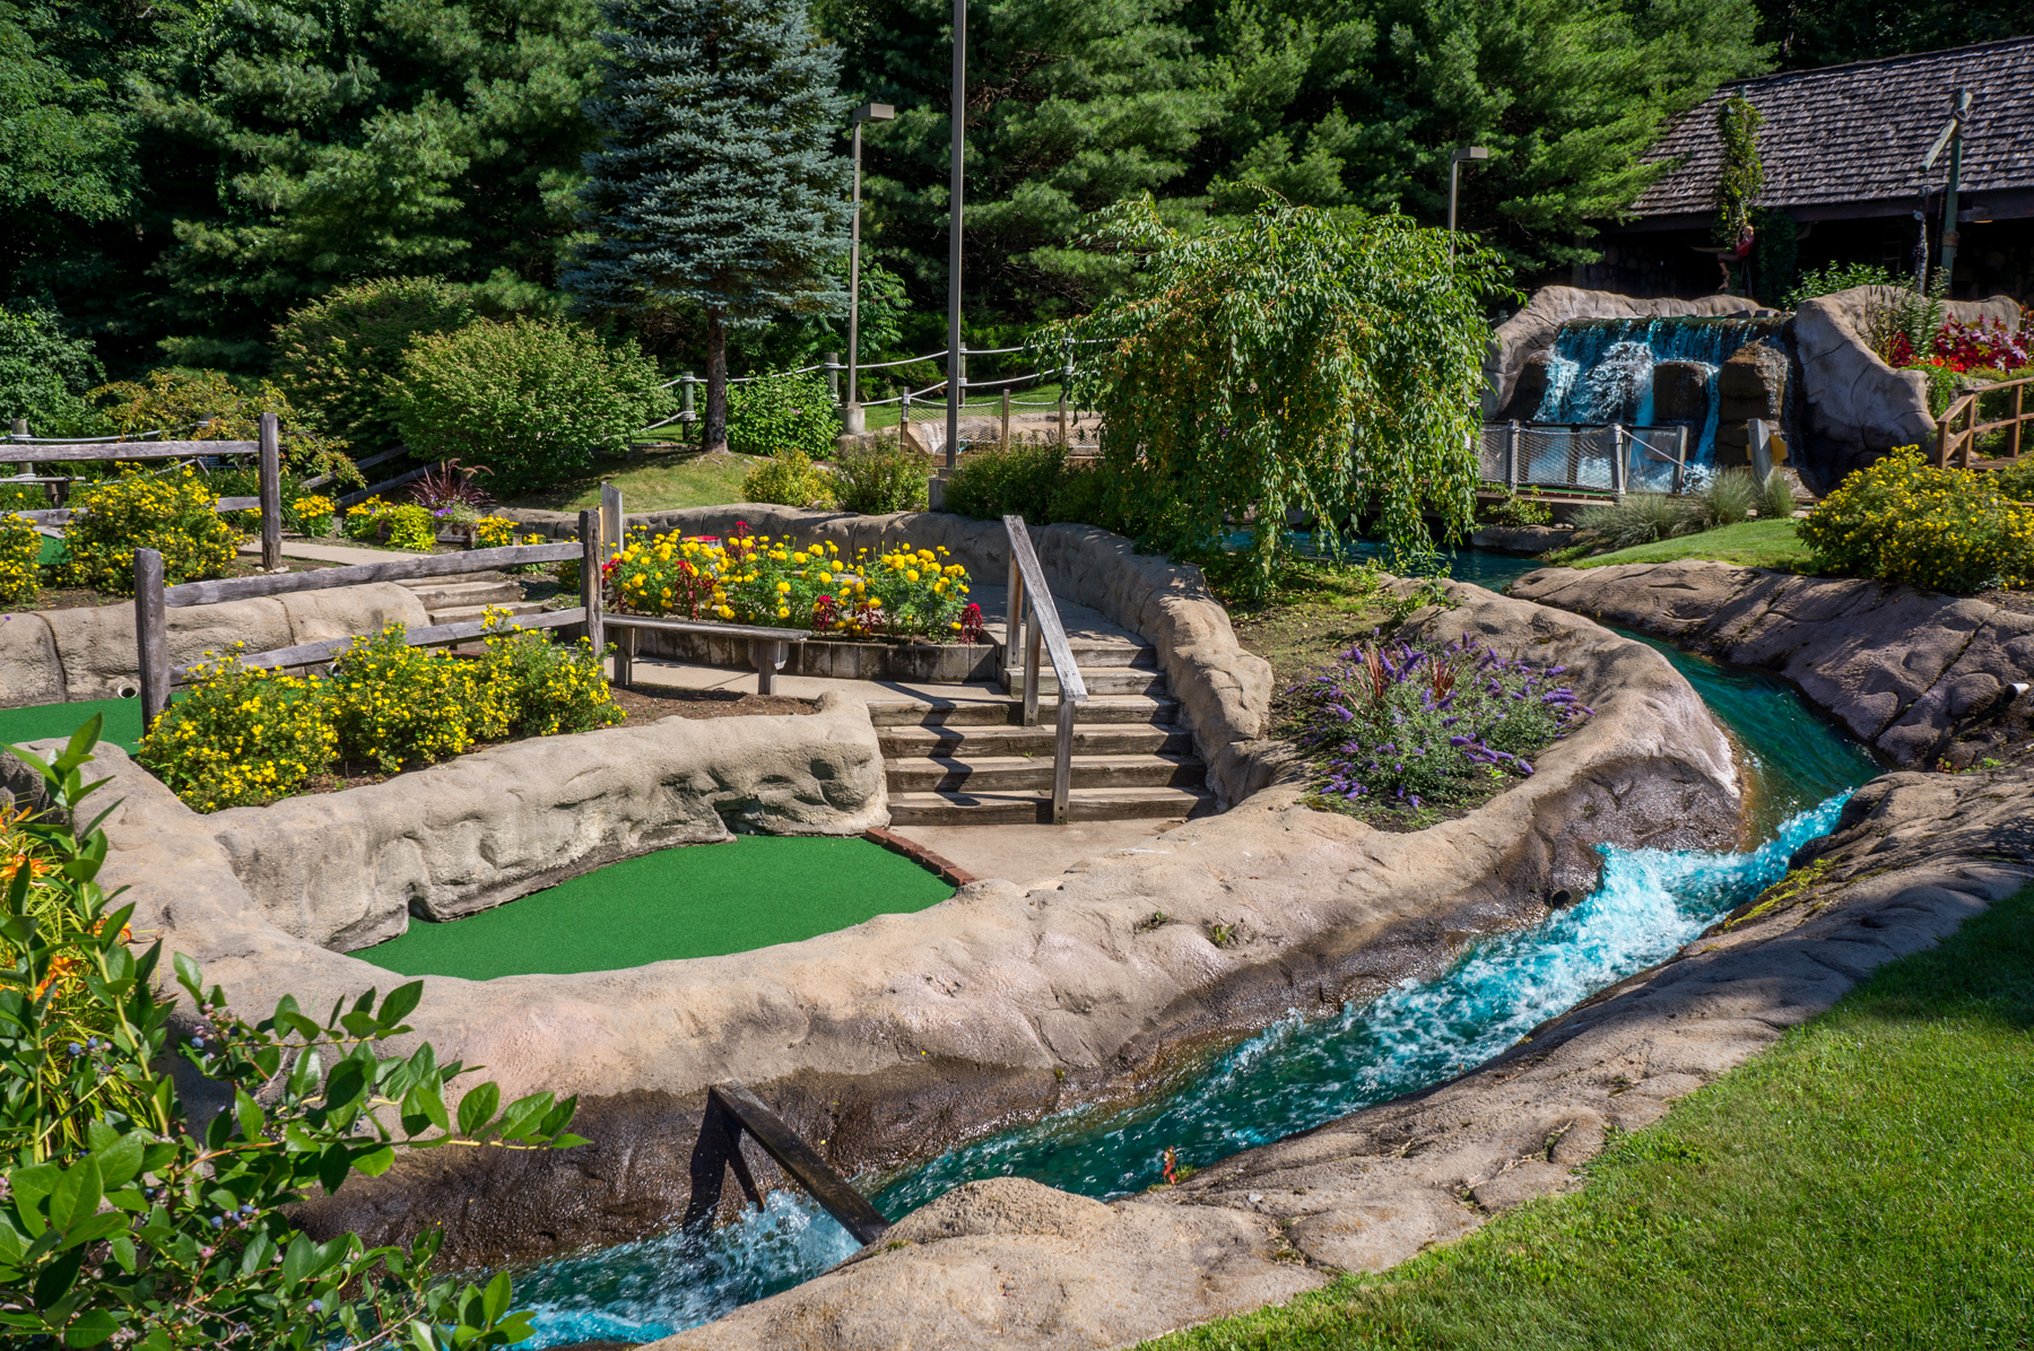 Mini golf course with greenery and water running through it